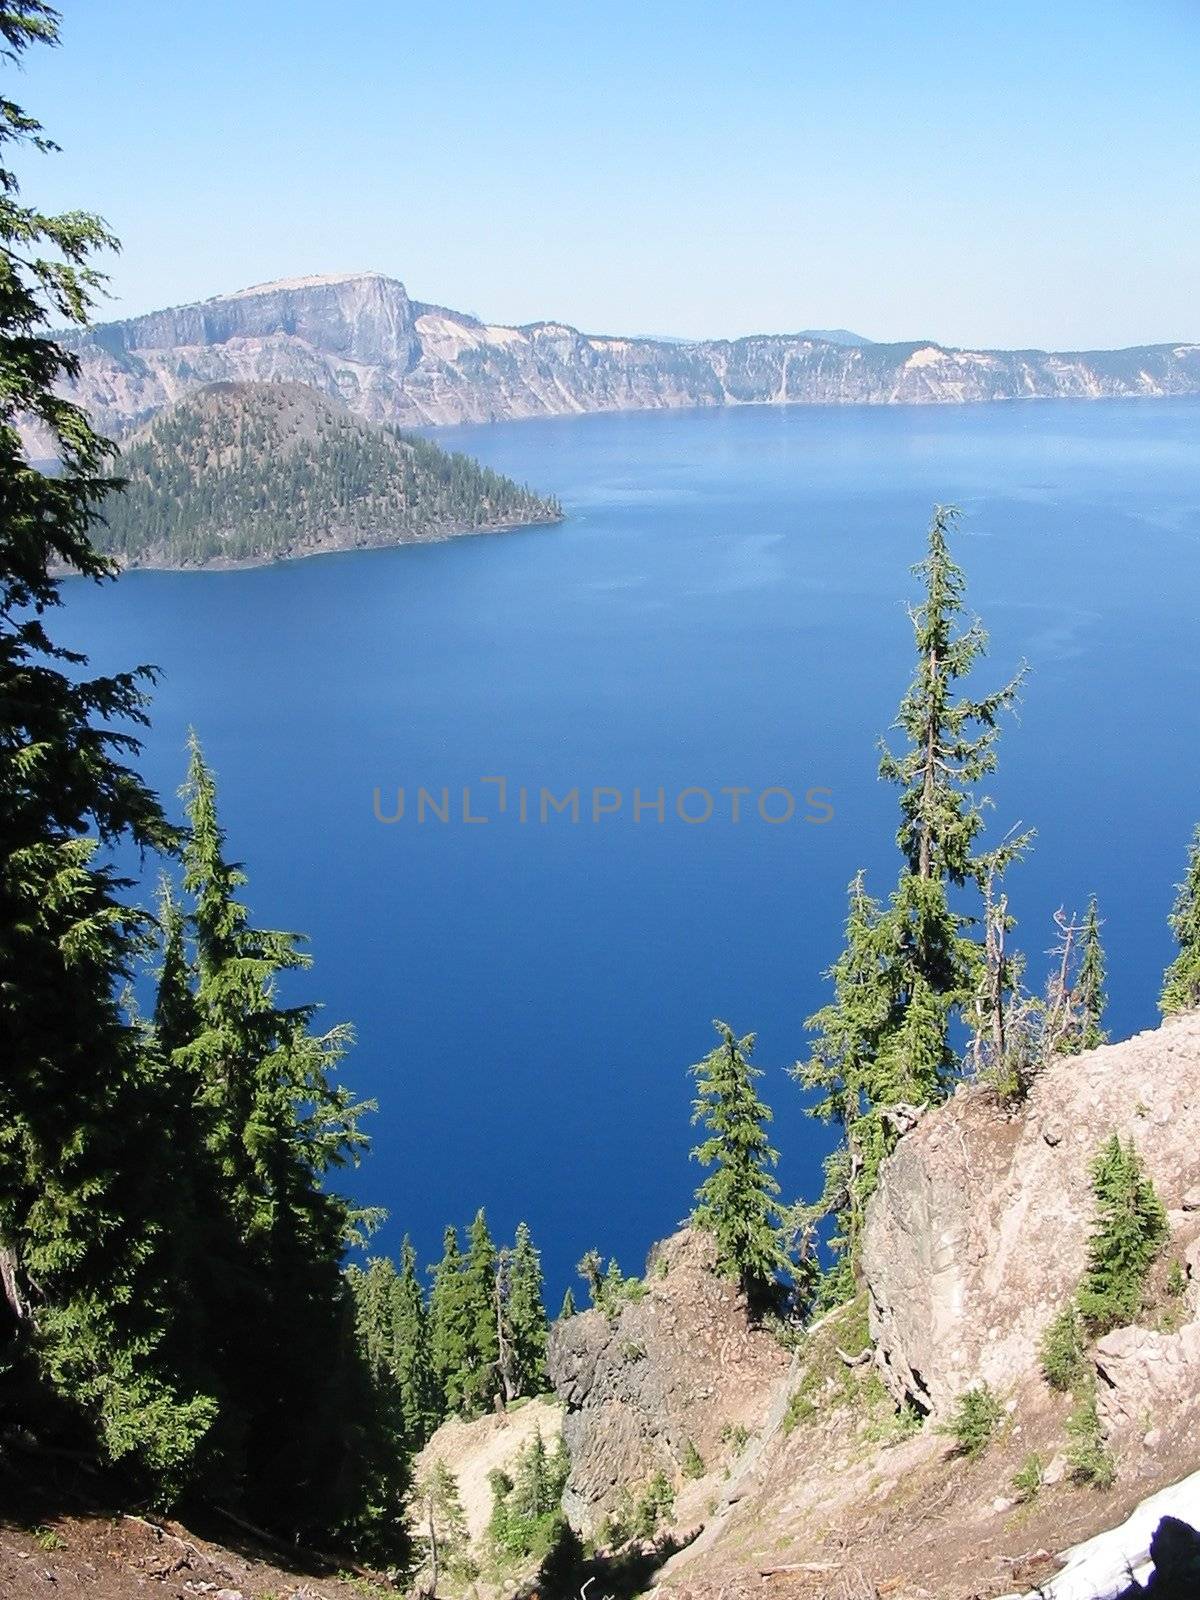 Crater Lake by melastmohican